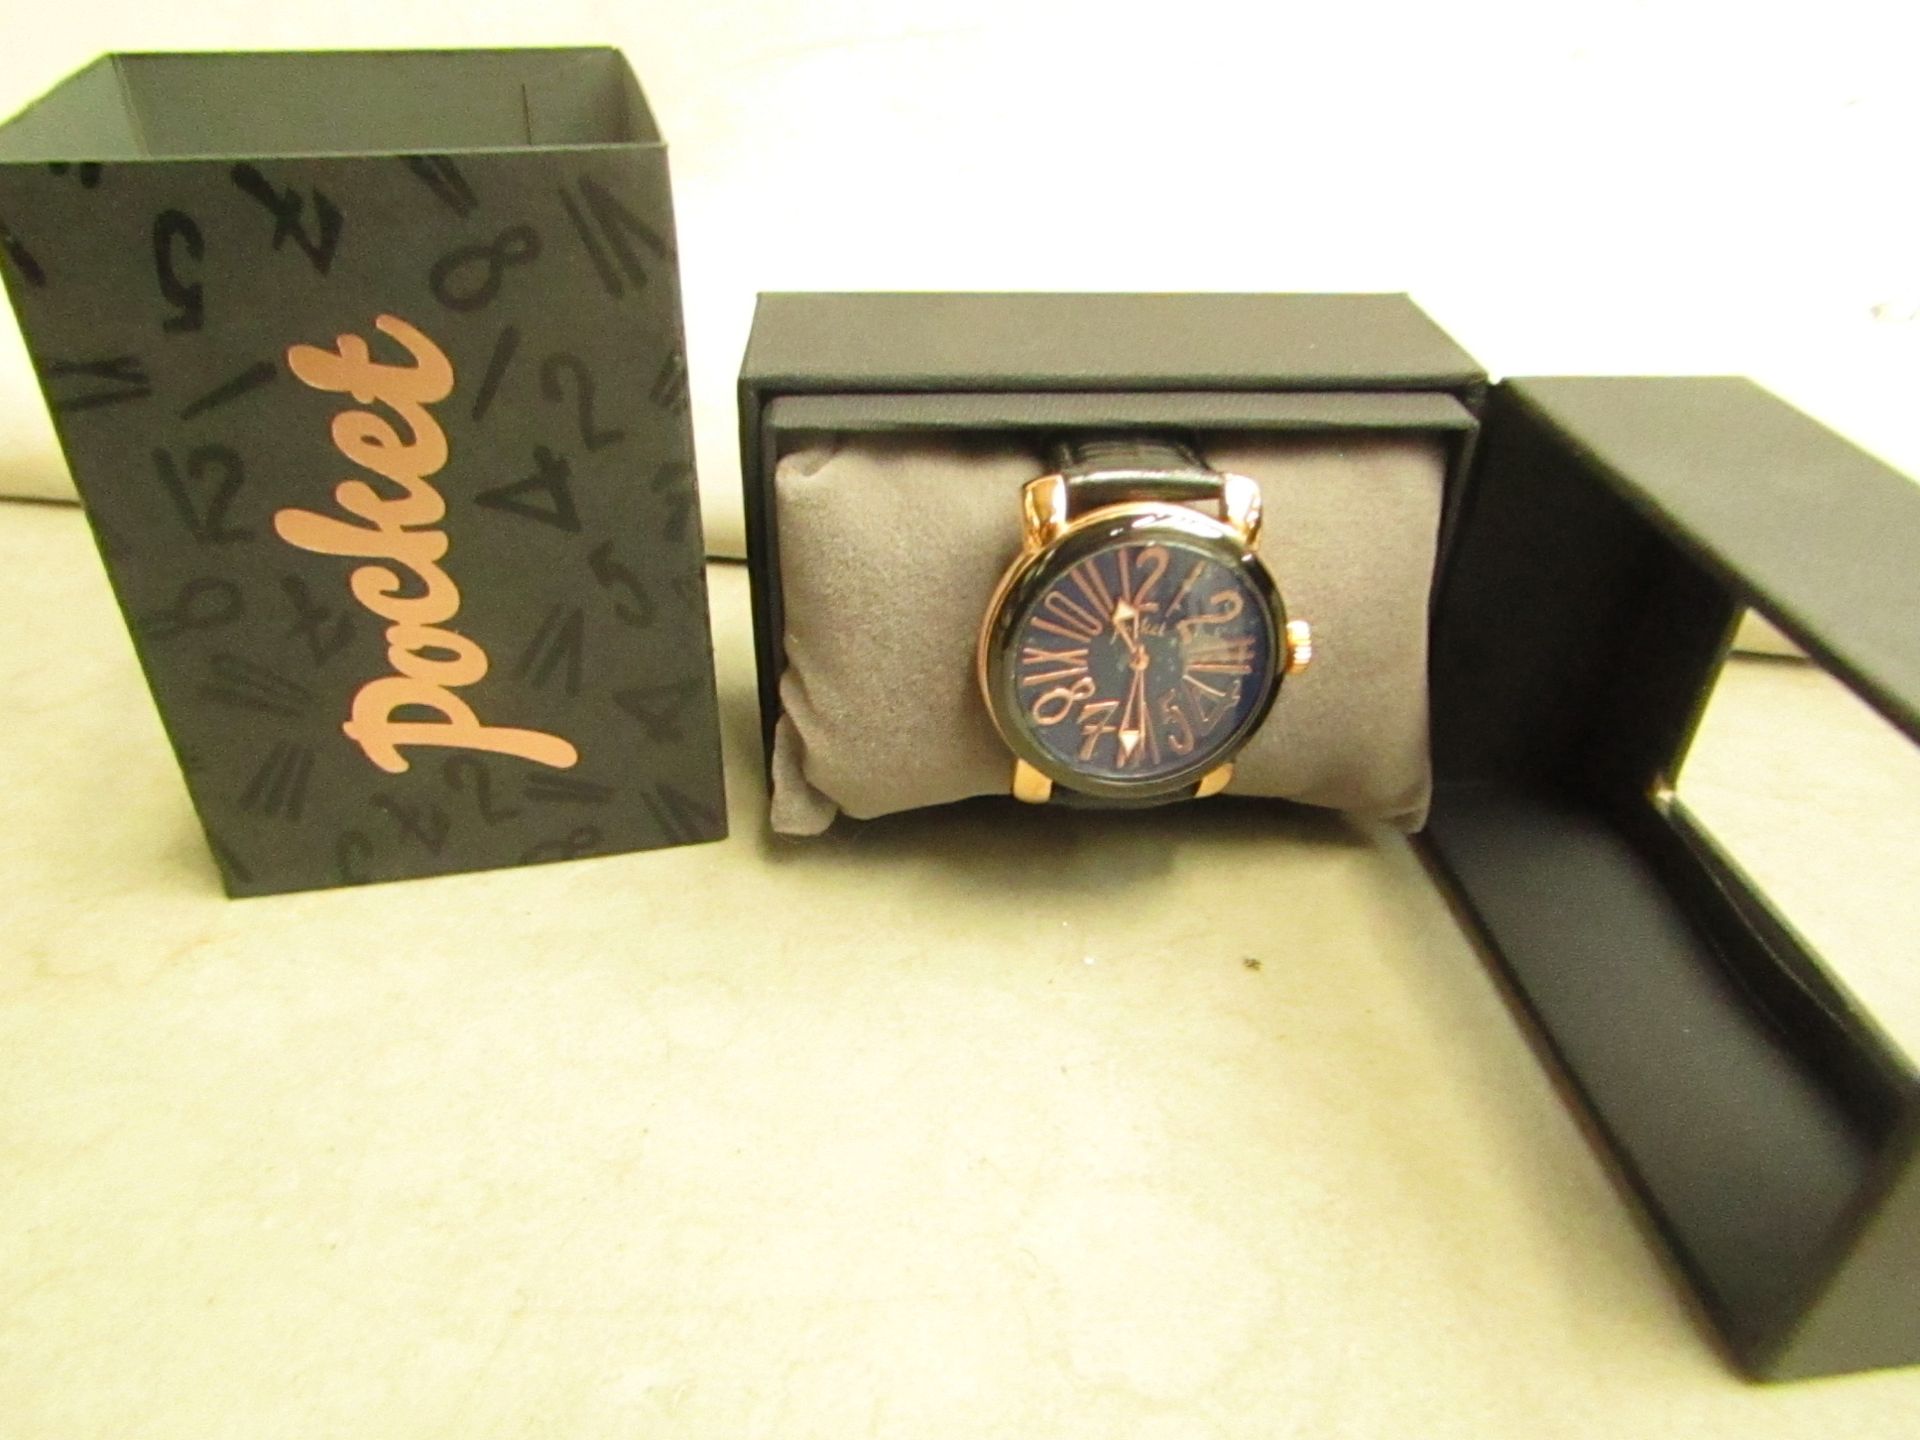 Pocket Branded Watch. New & Boxed. See Image